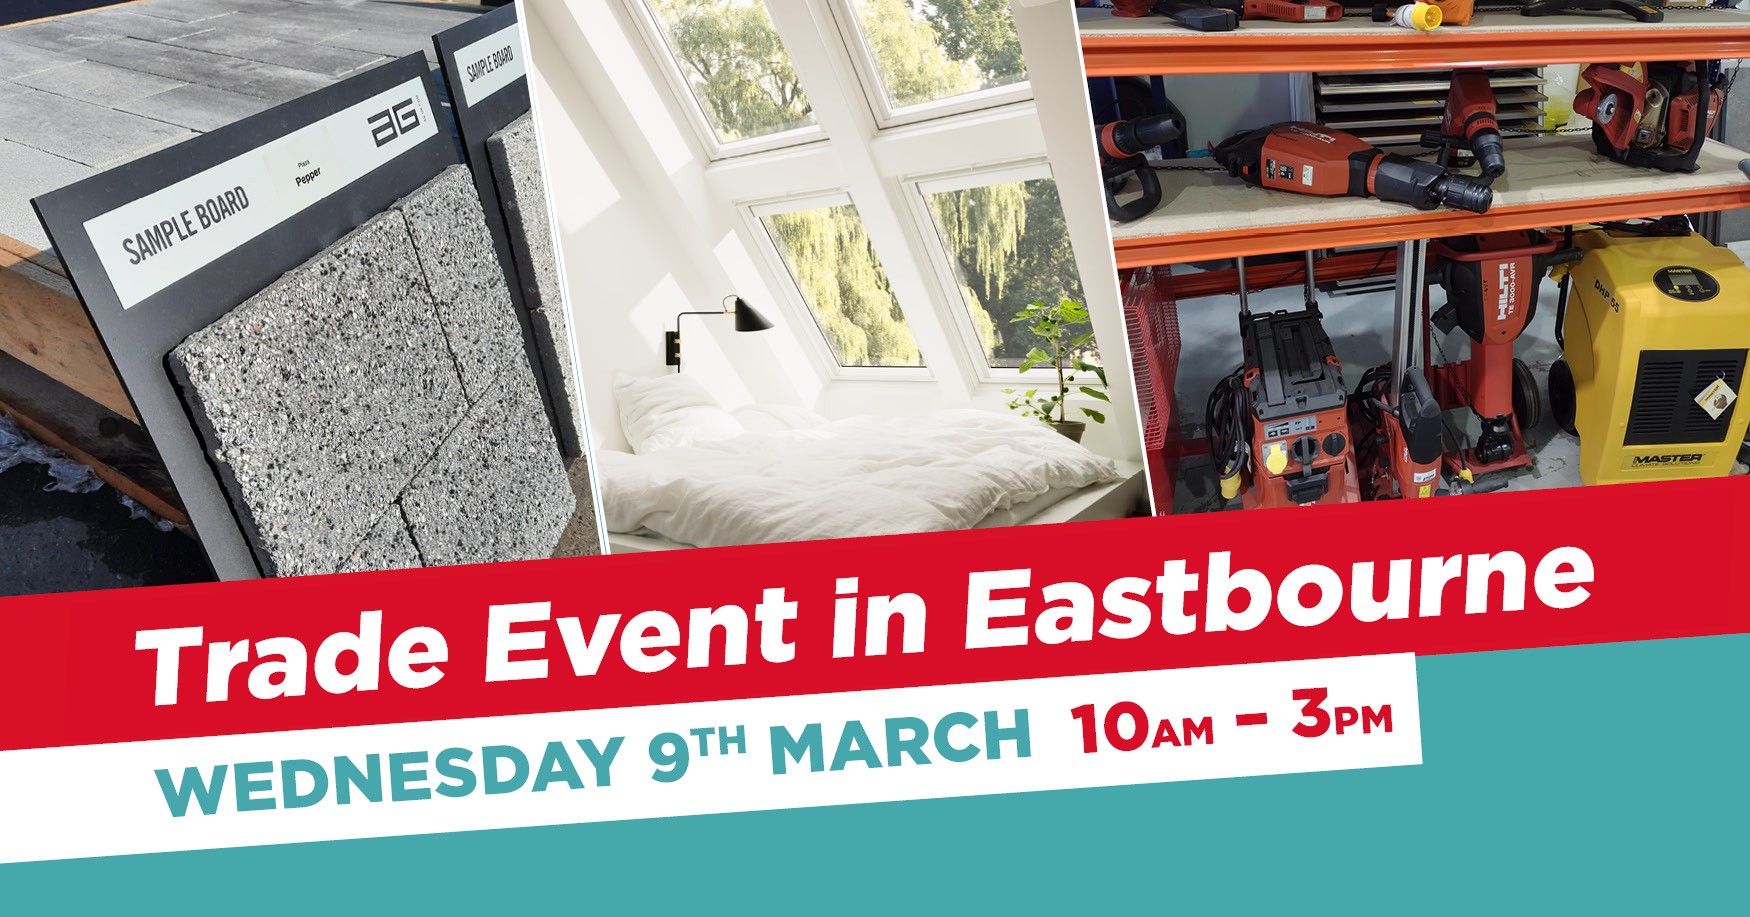 Eastbourne Trade Event with Special Offers, Charity Raffle & Food Announced